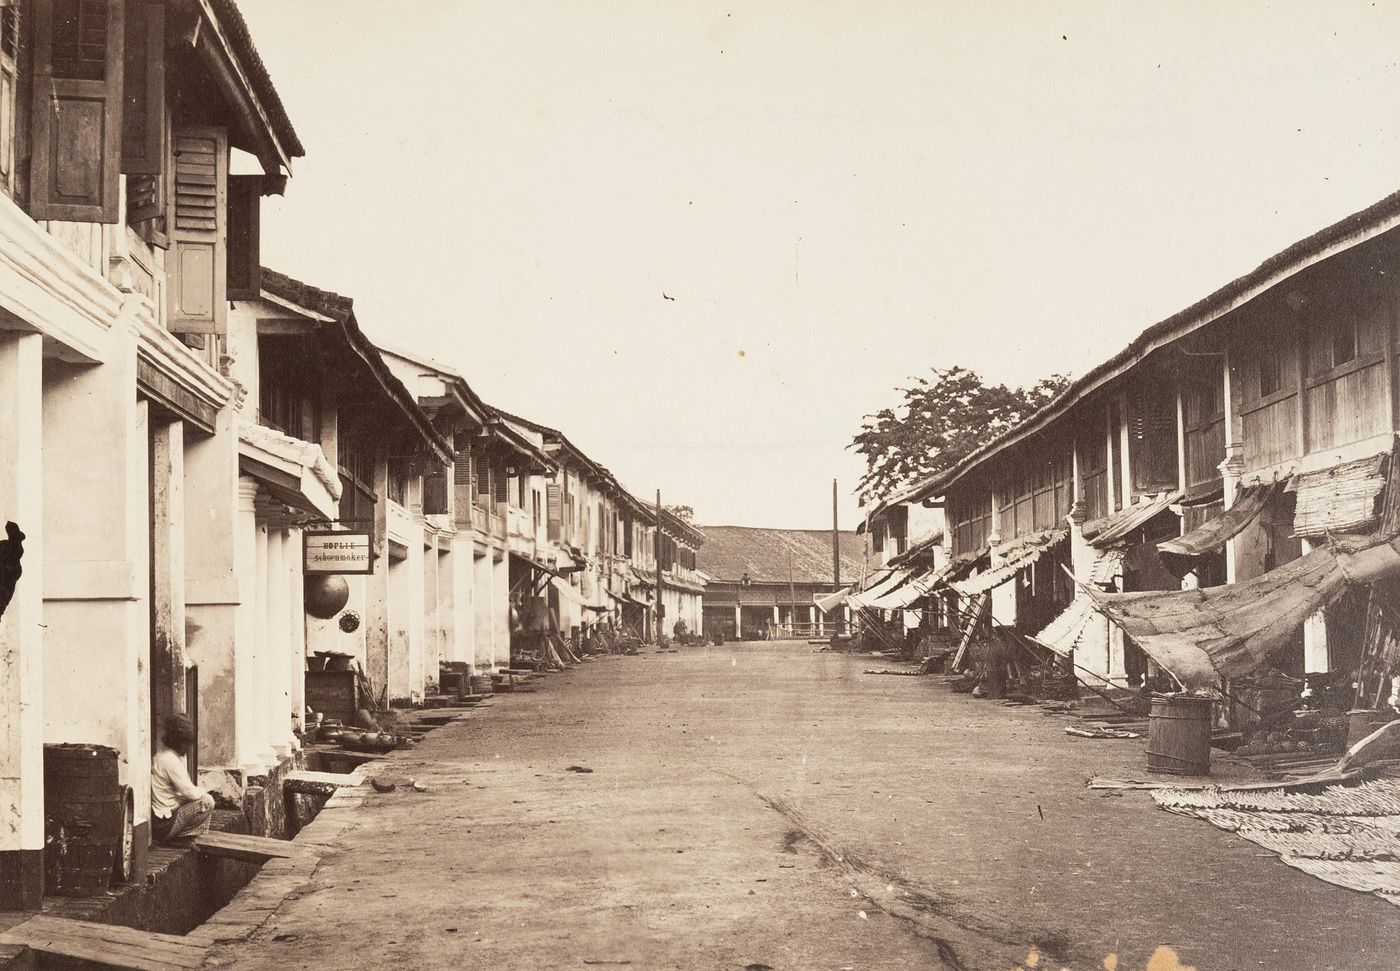 View of a street in Riau, Strait of Malacca